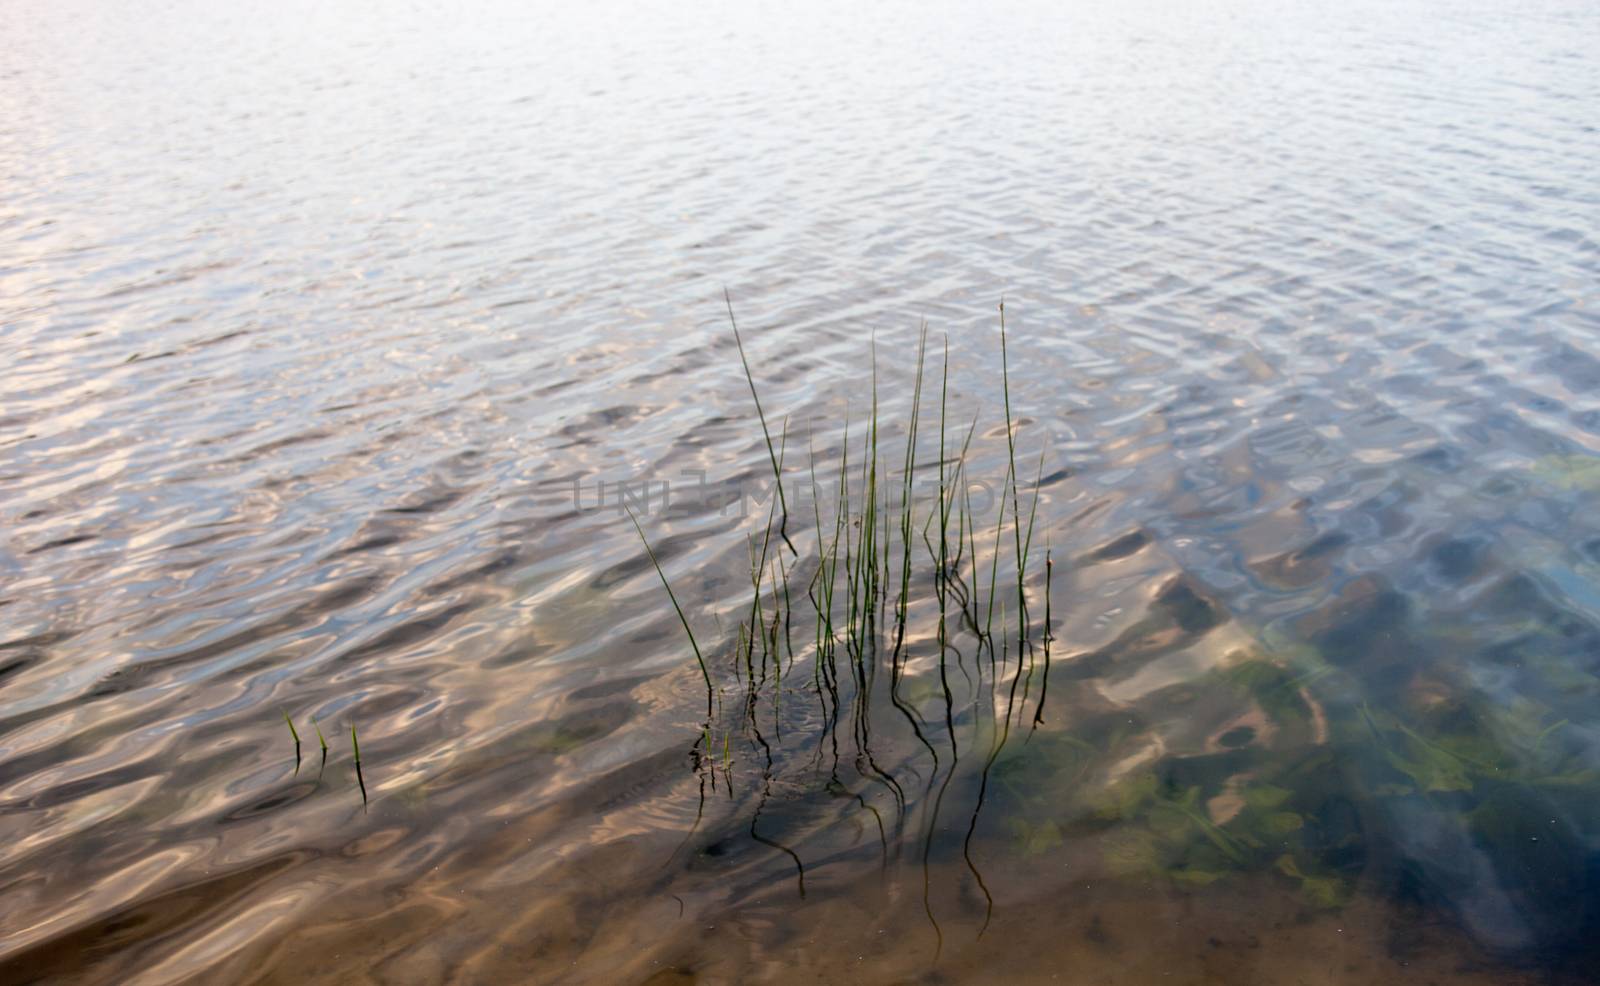 Water surface near the bank with visible water plants and young reed stems.